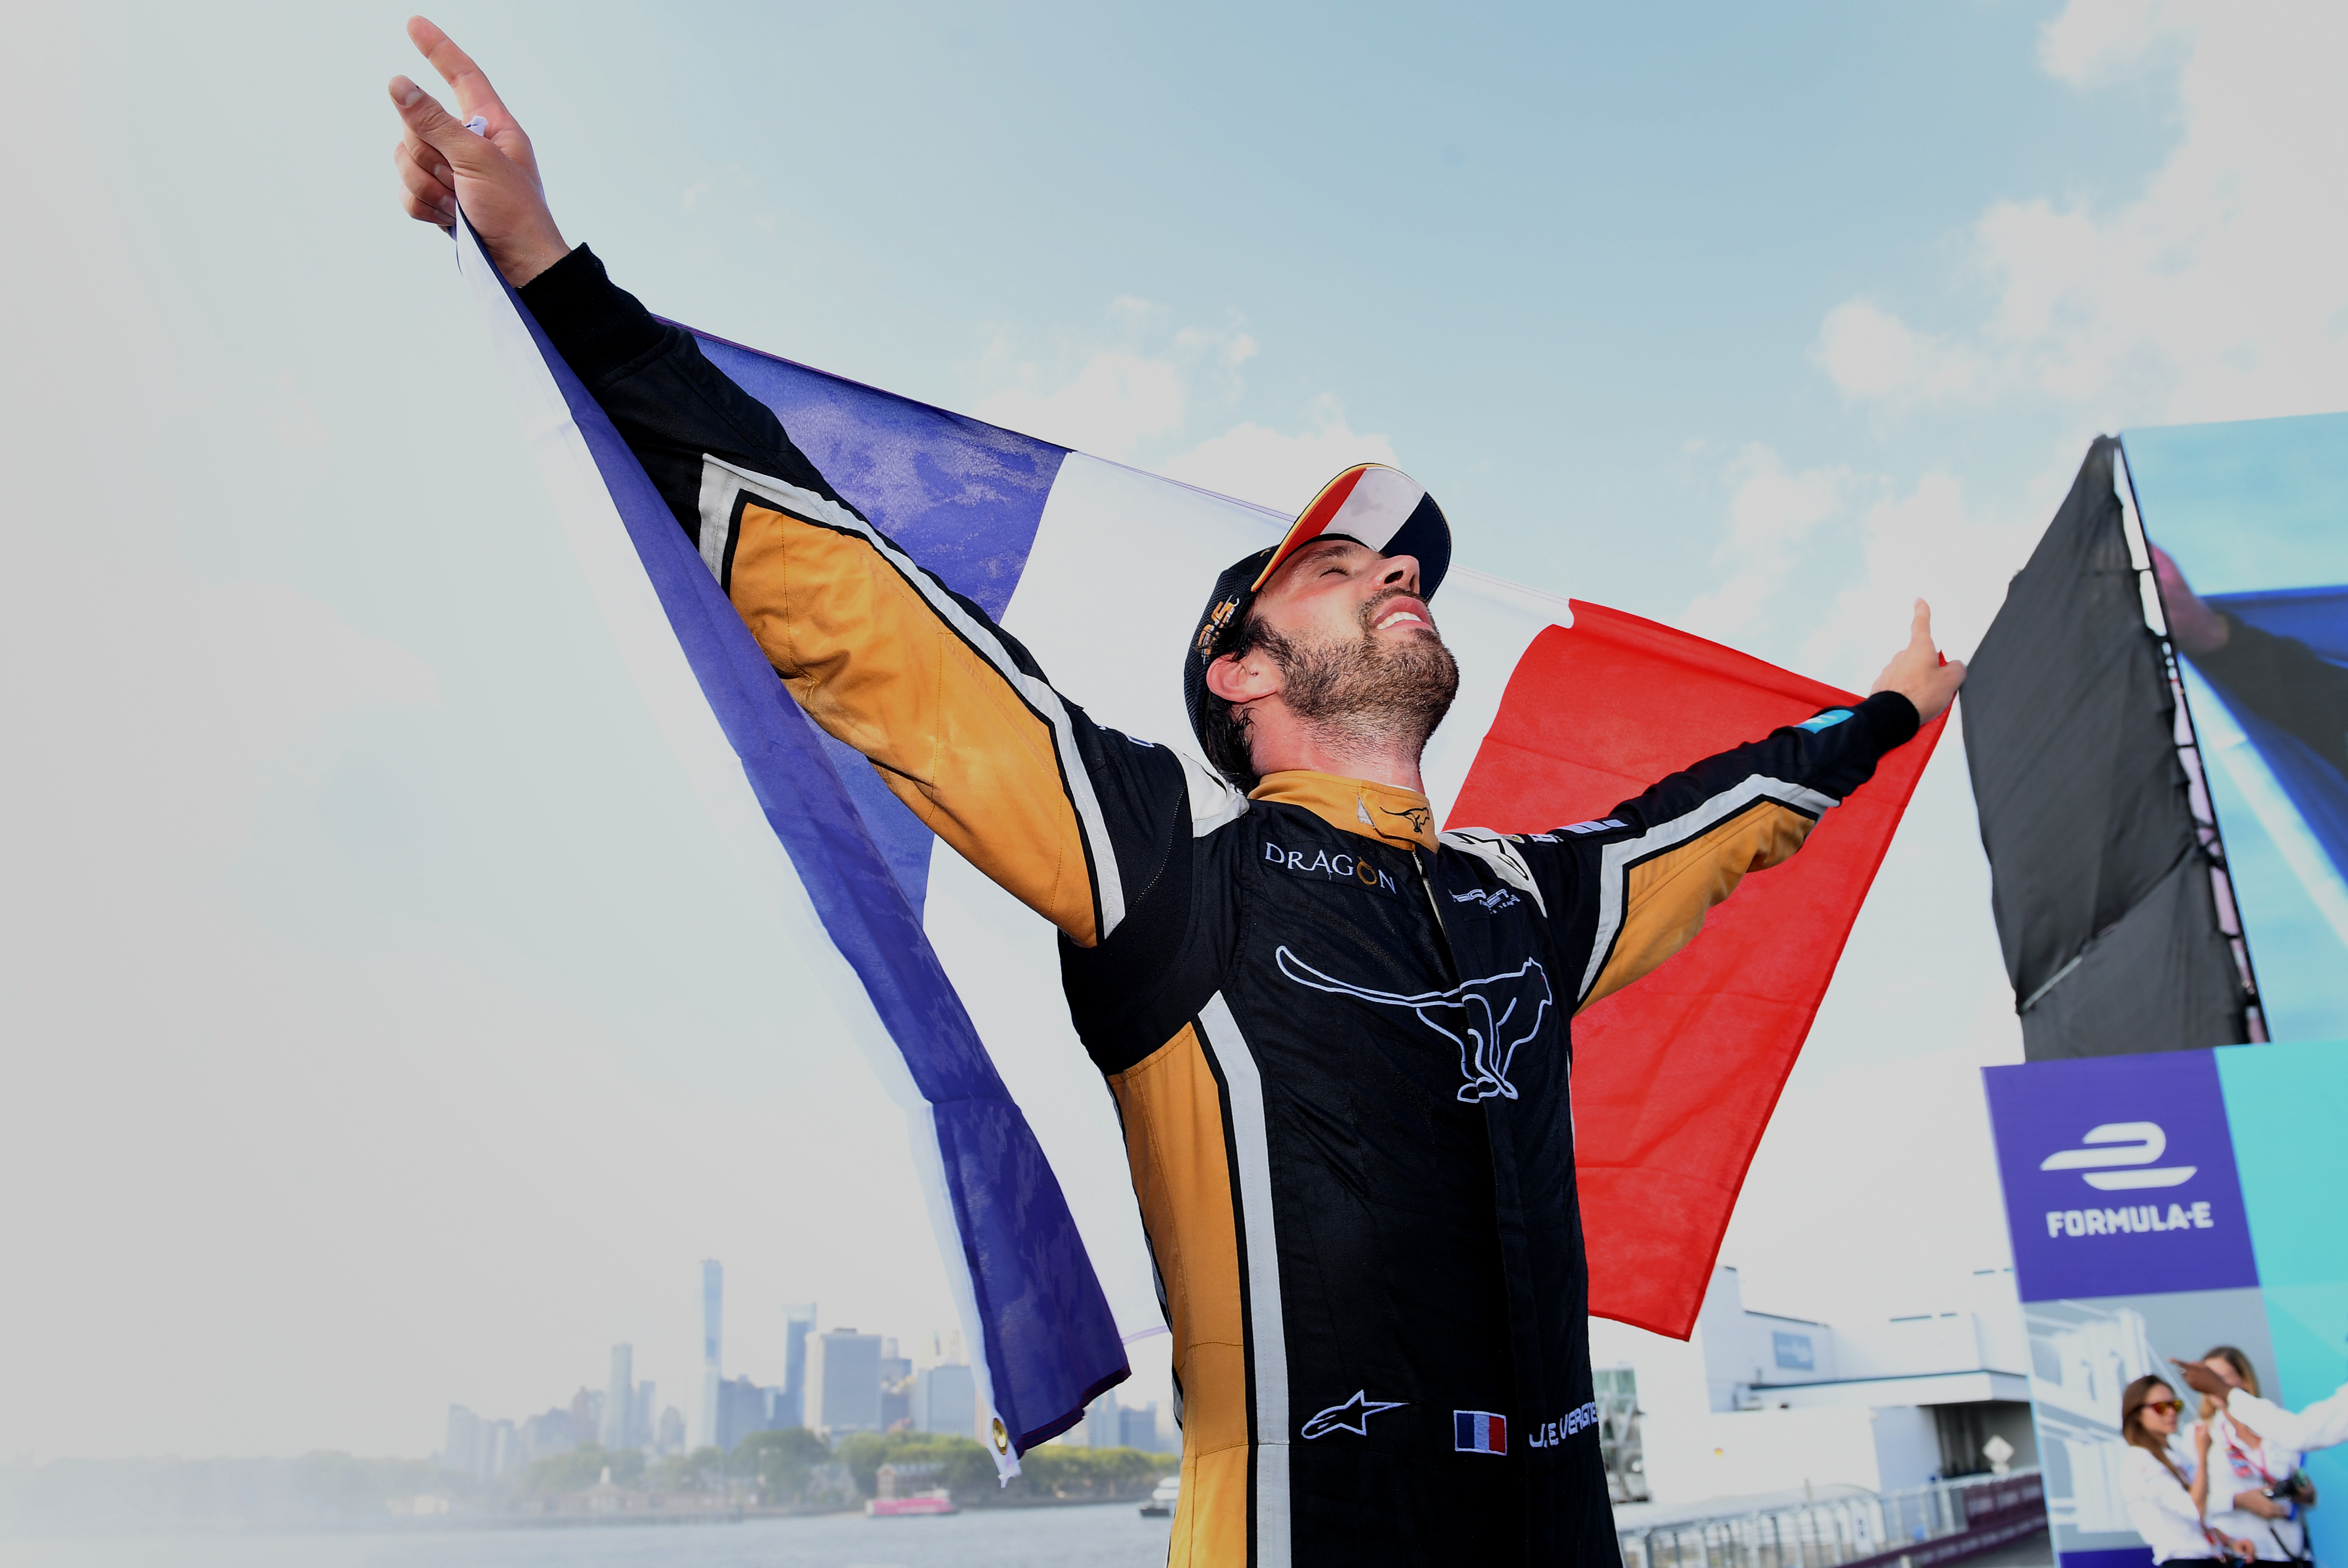 newly-crowned_formula_e_champion_jean-eric_vergne_holding_the_french_flag_aloft_against_the_backdrop_of_the_new_york_skyline.jpg